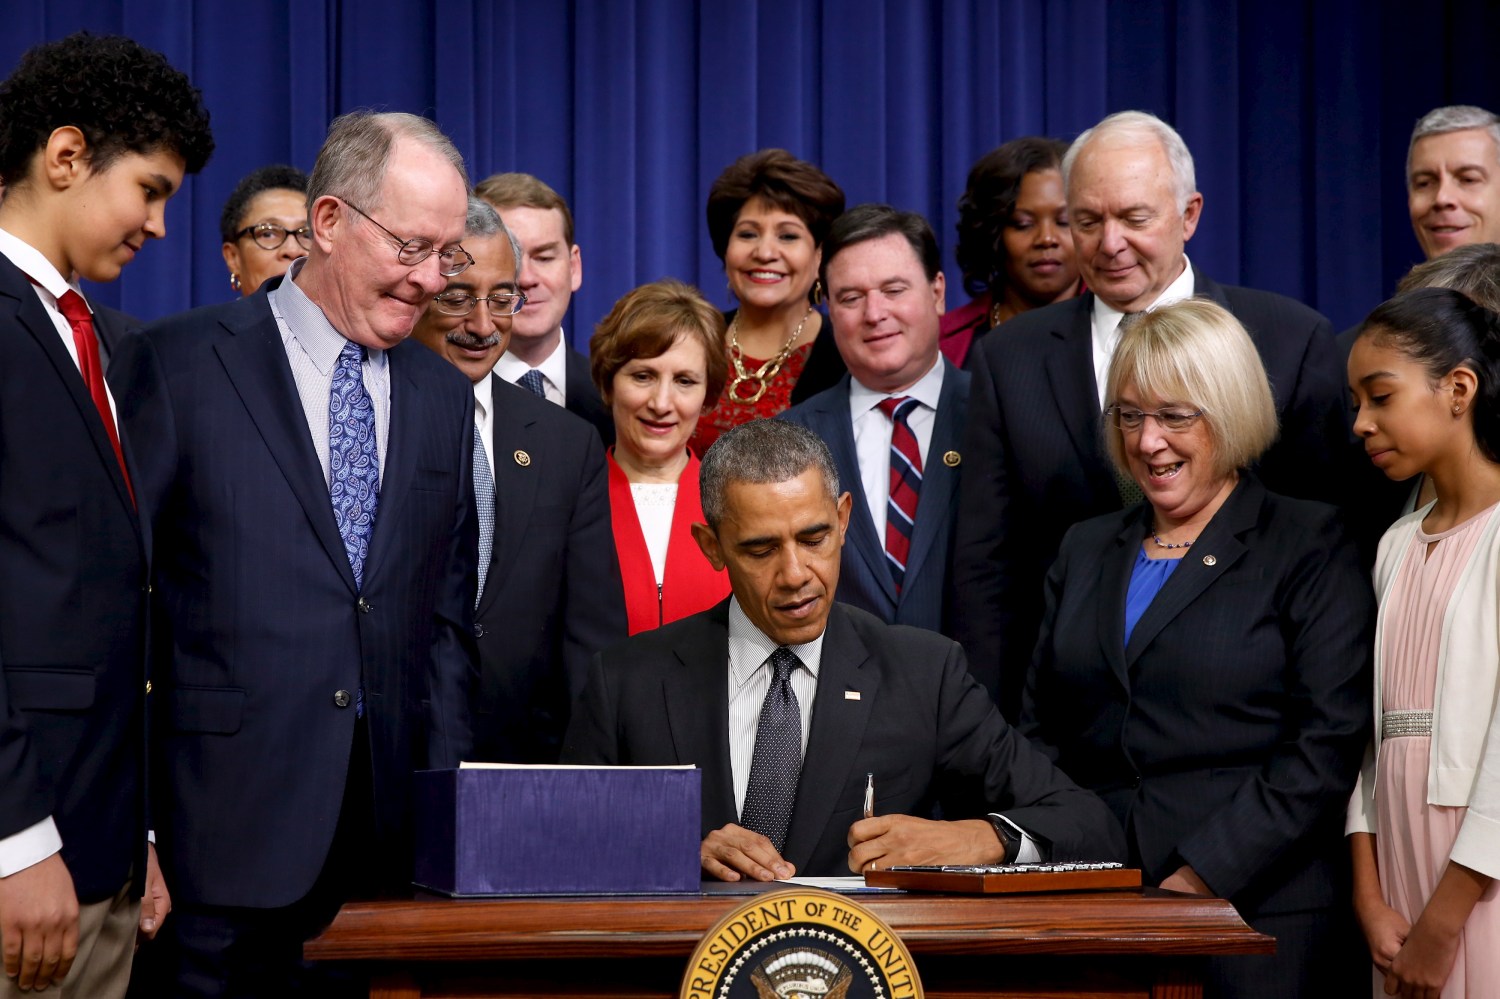 Obama signs the Every Student Succeeds Act